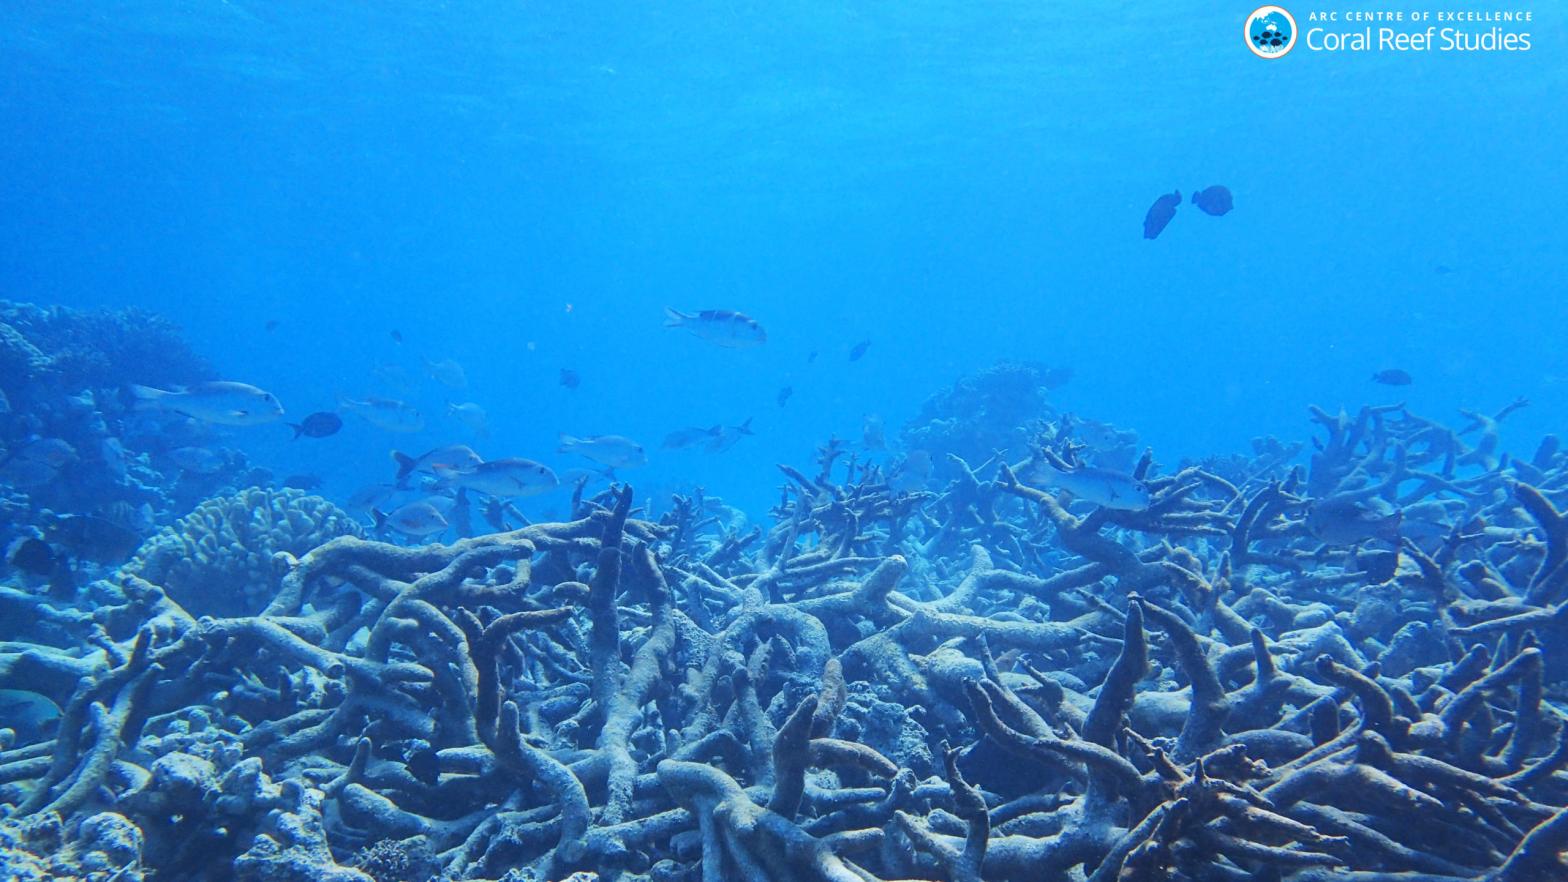 A staghorn coral graveyard. (Photo: ARC Centre for Excellence)